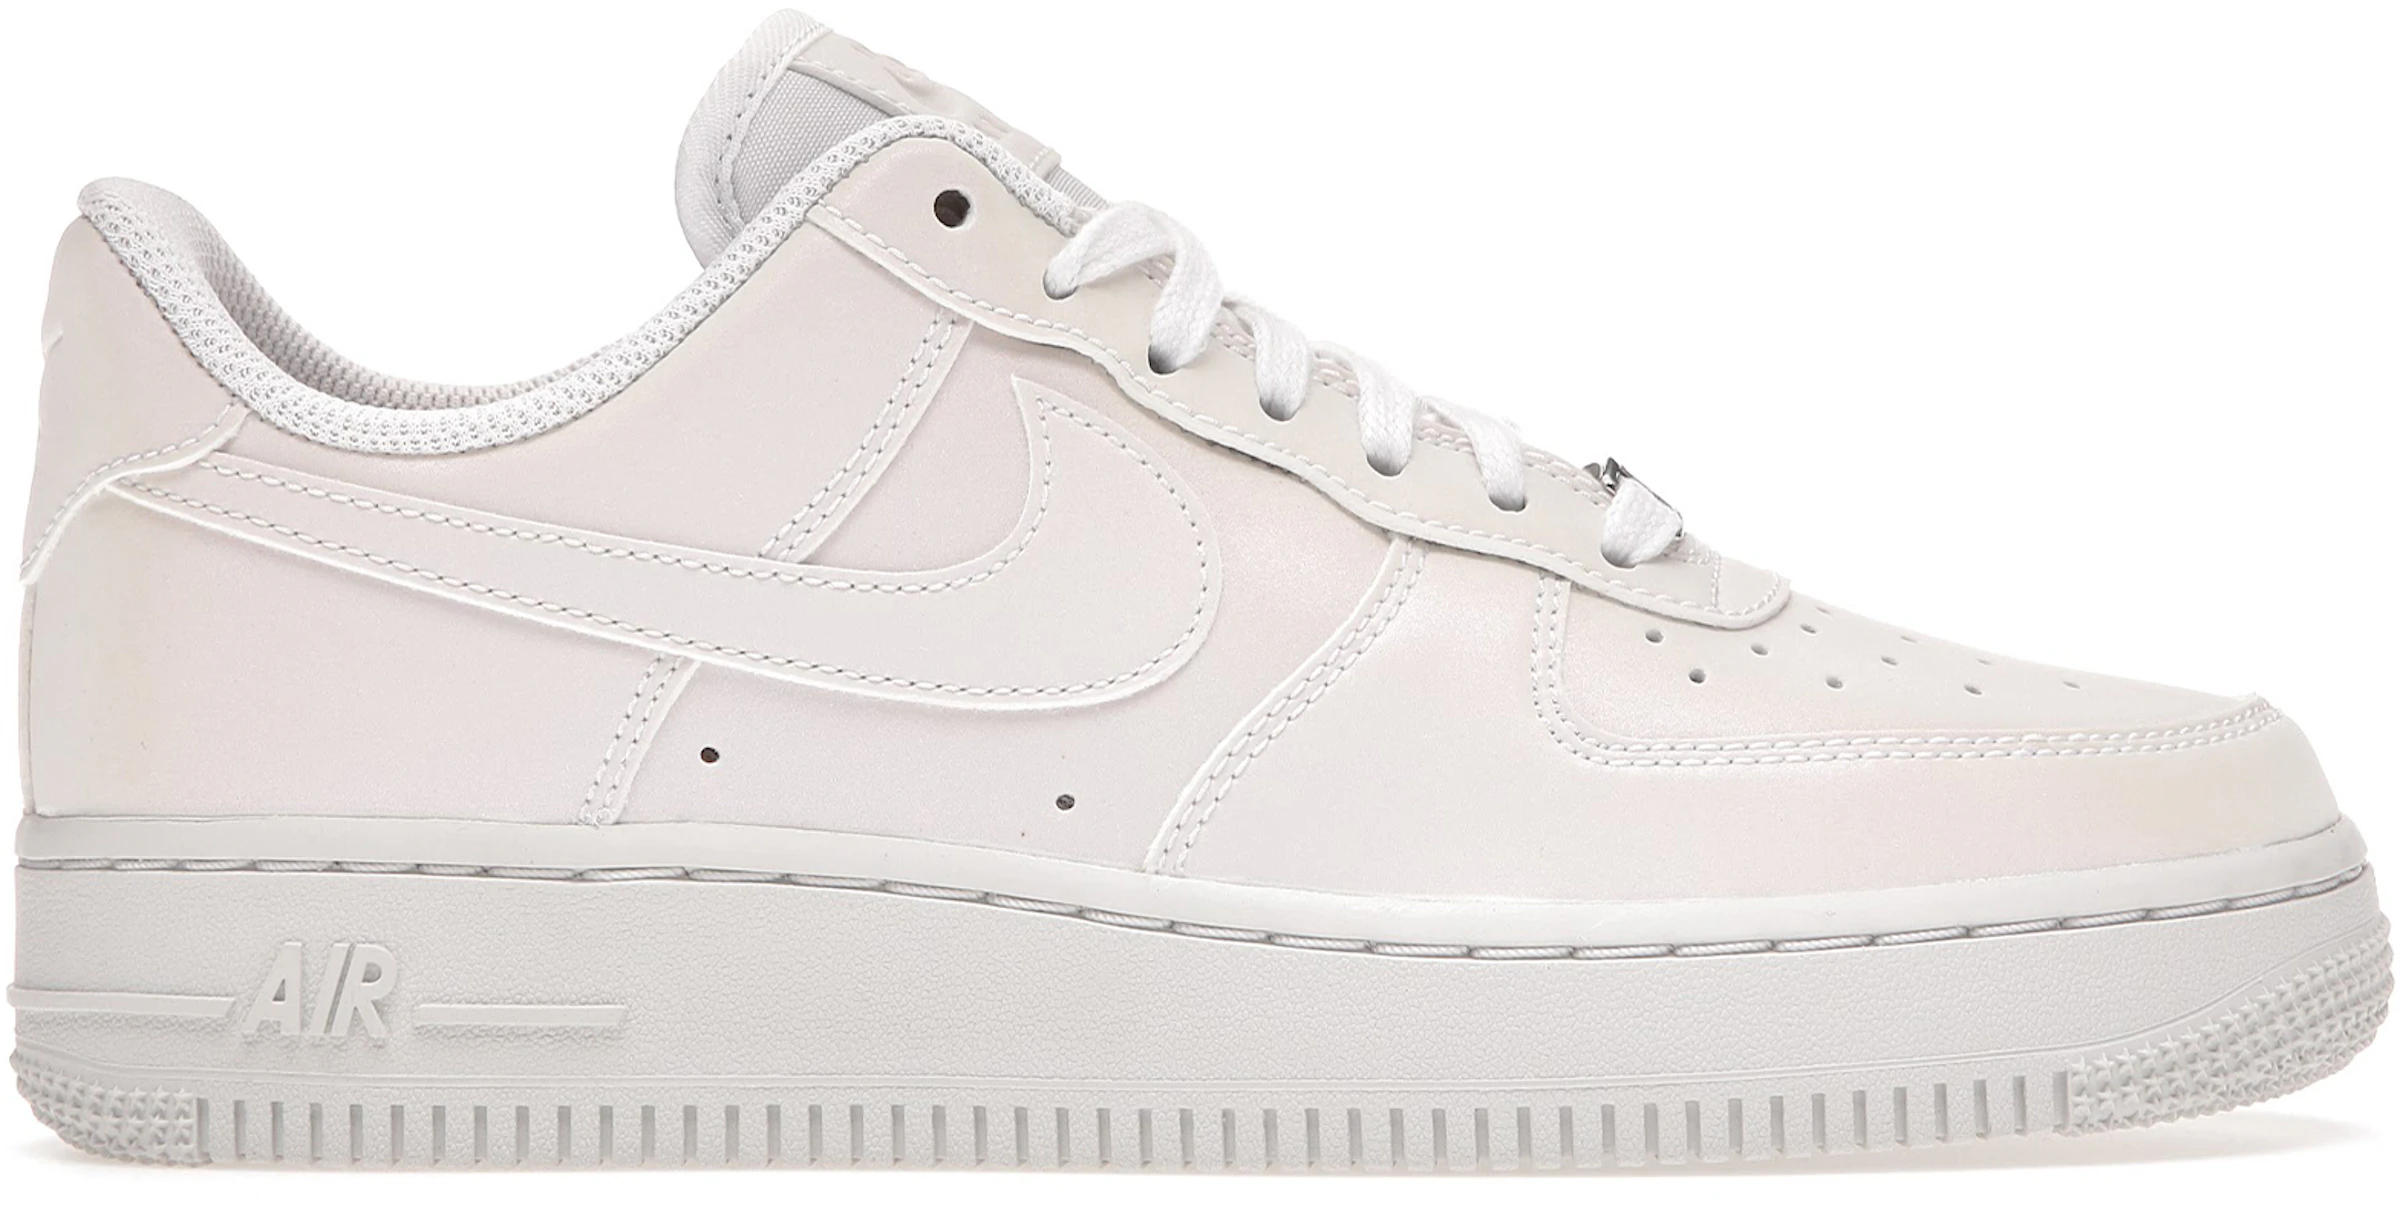 Nike Air Force 1 Low Reflective White (W) - ES